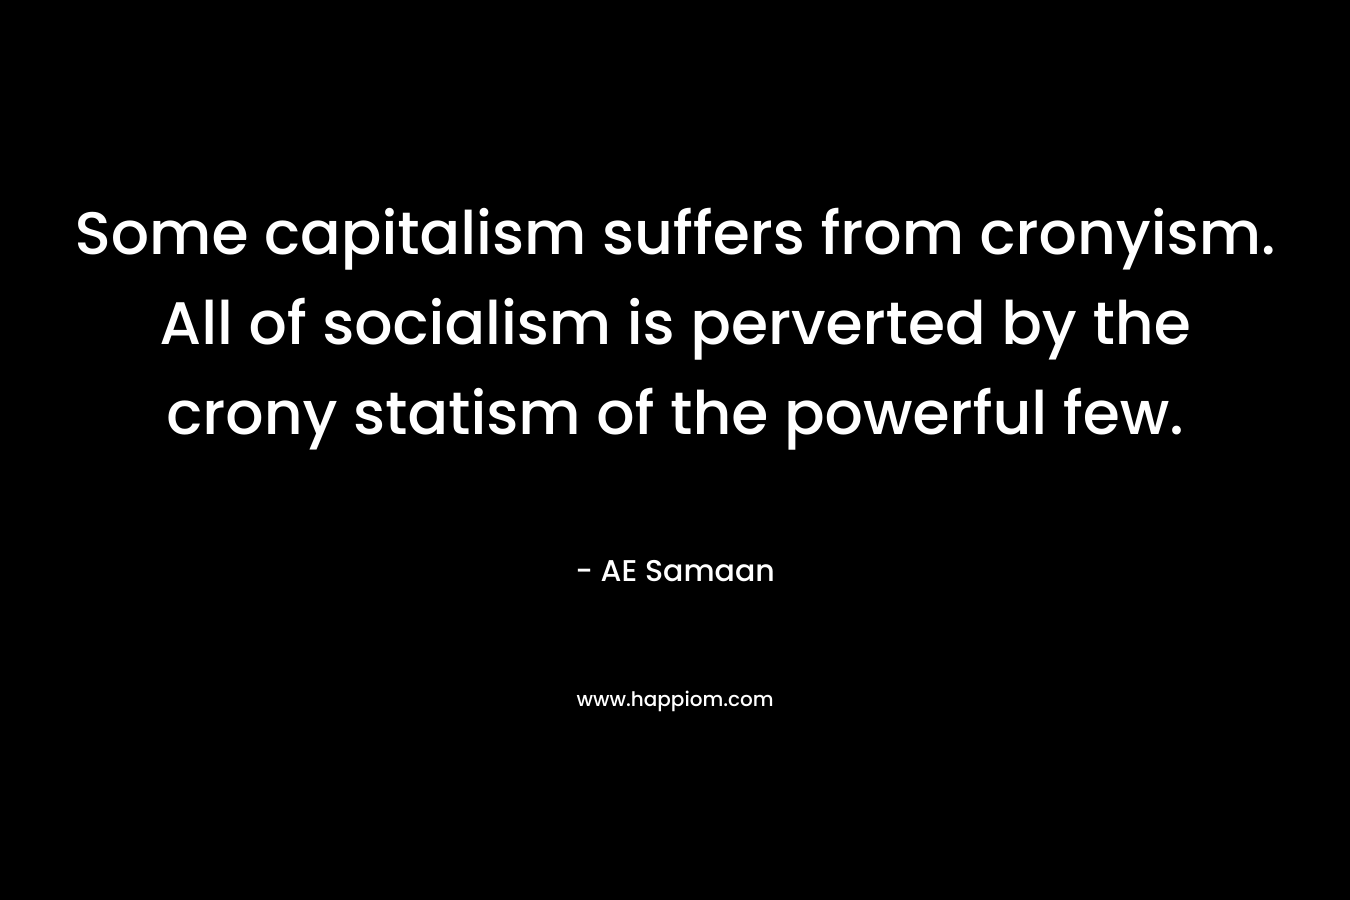 Some capitalism suffers from cronyism. All of socialism is perverted by the crony statism of the powerful few.